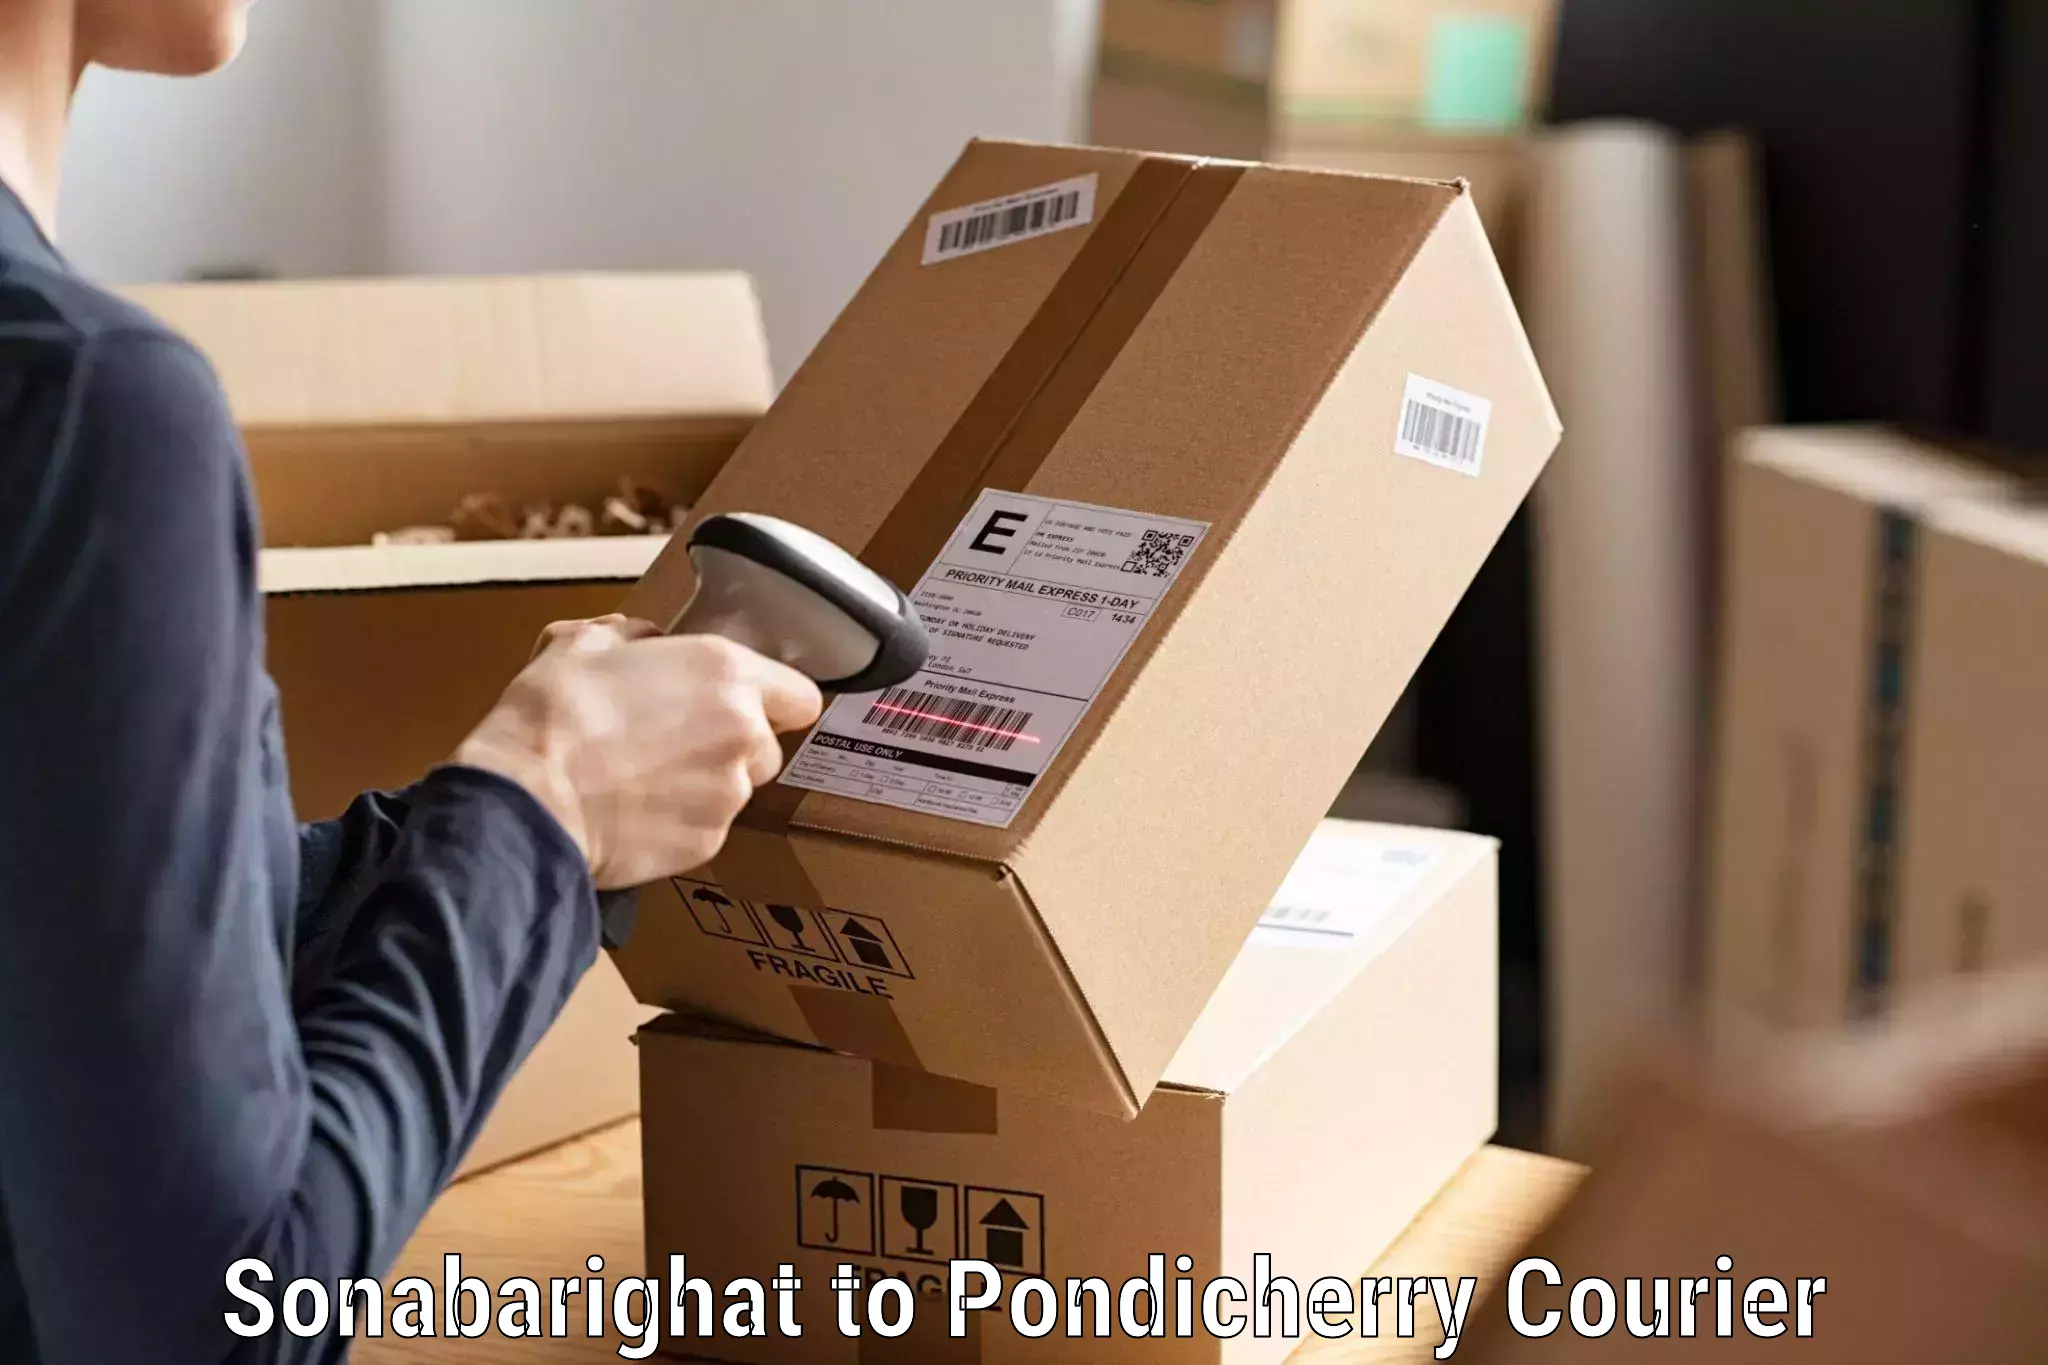 Reliable delivery network Sonabarighat to Pondicherry